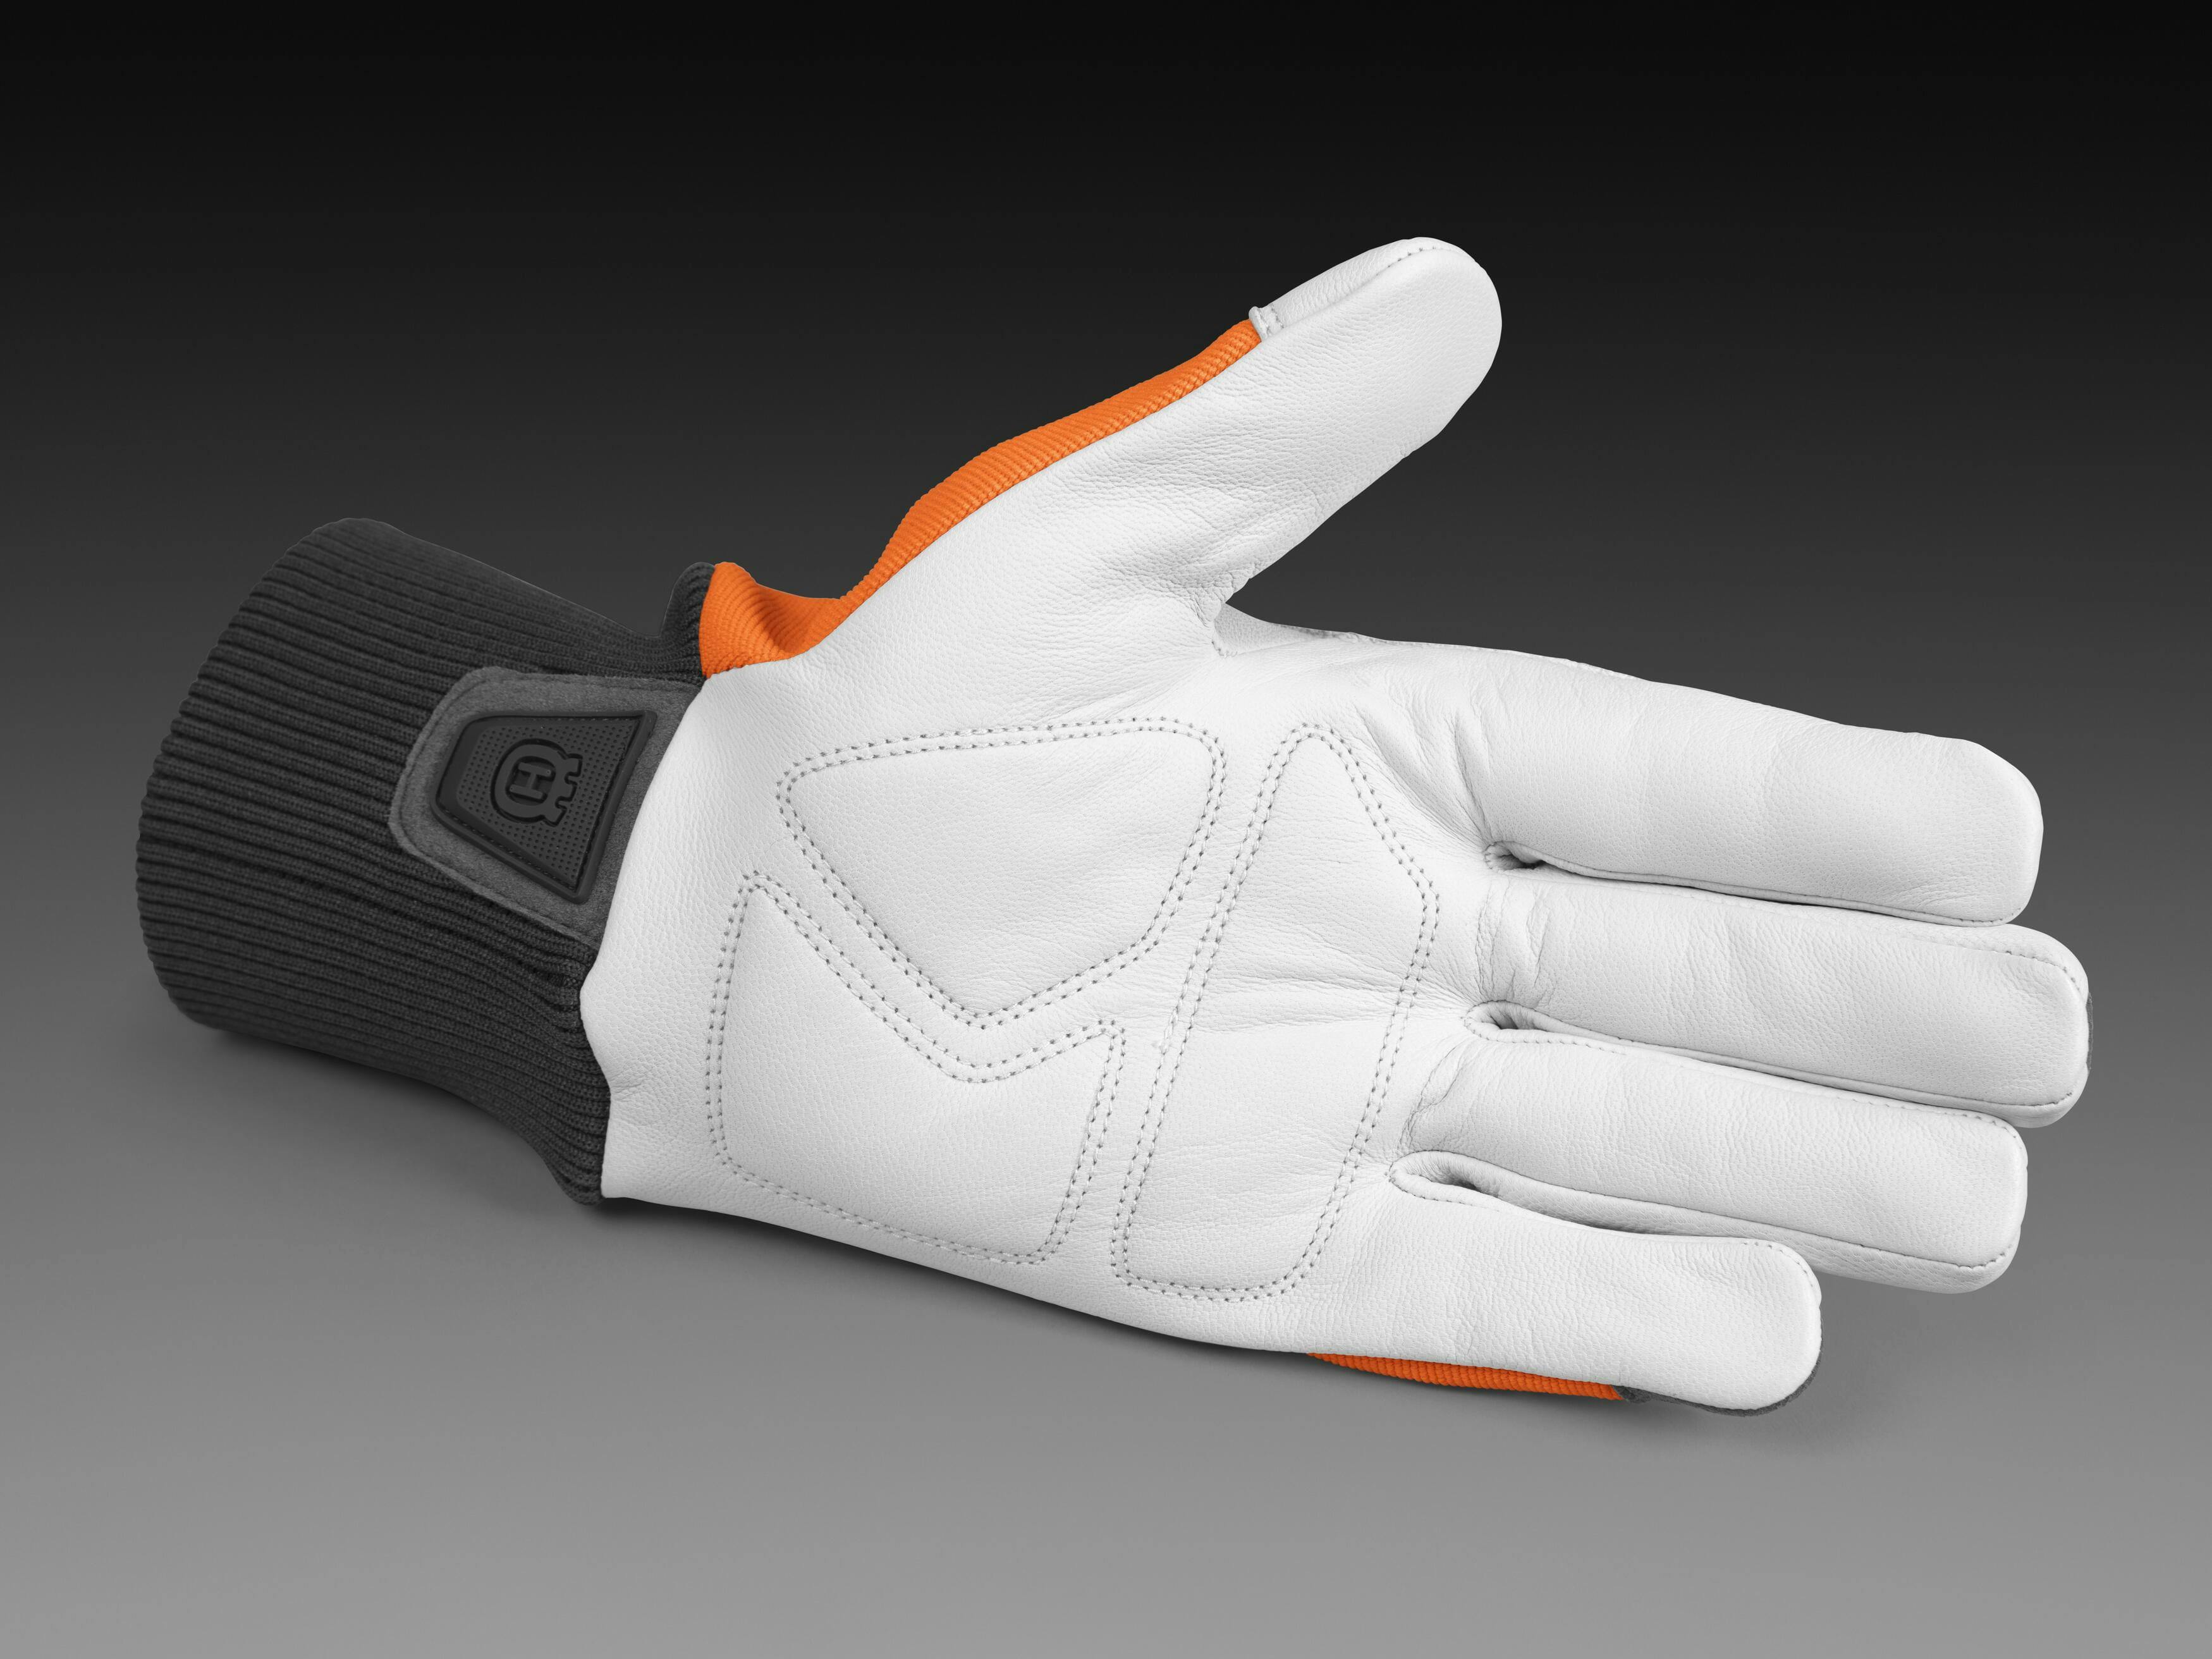 Gloves, Functional with saw protection image 3